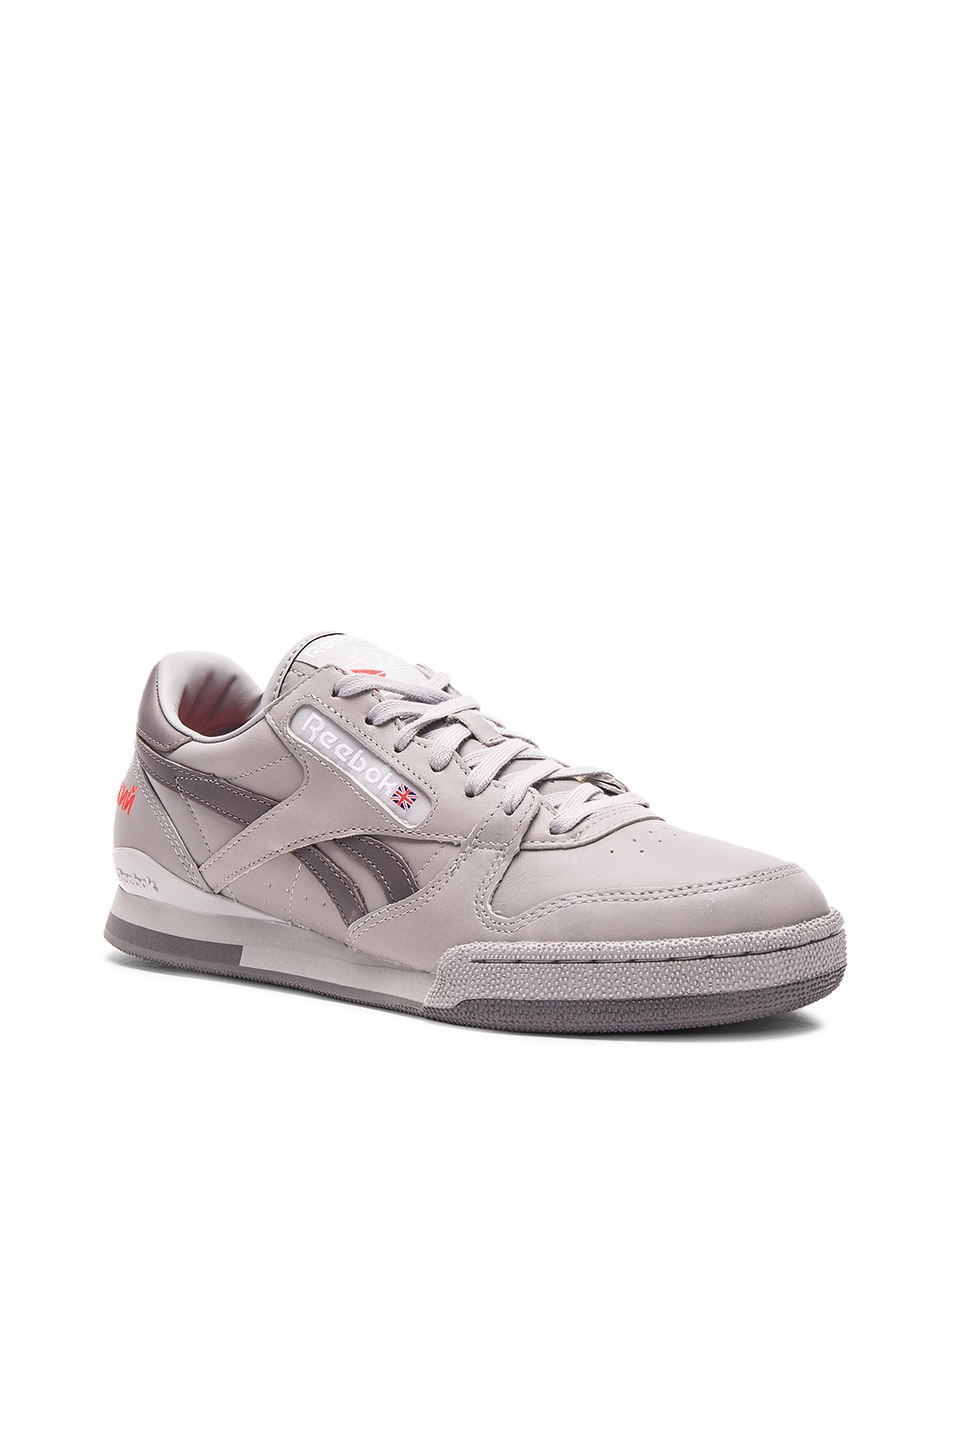 Image 1 of Gosha Rubchinskiy x Reebok Classic Embroidered Leather Sneakers in Grey